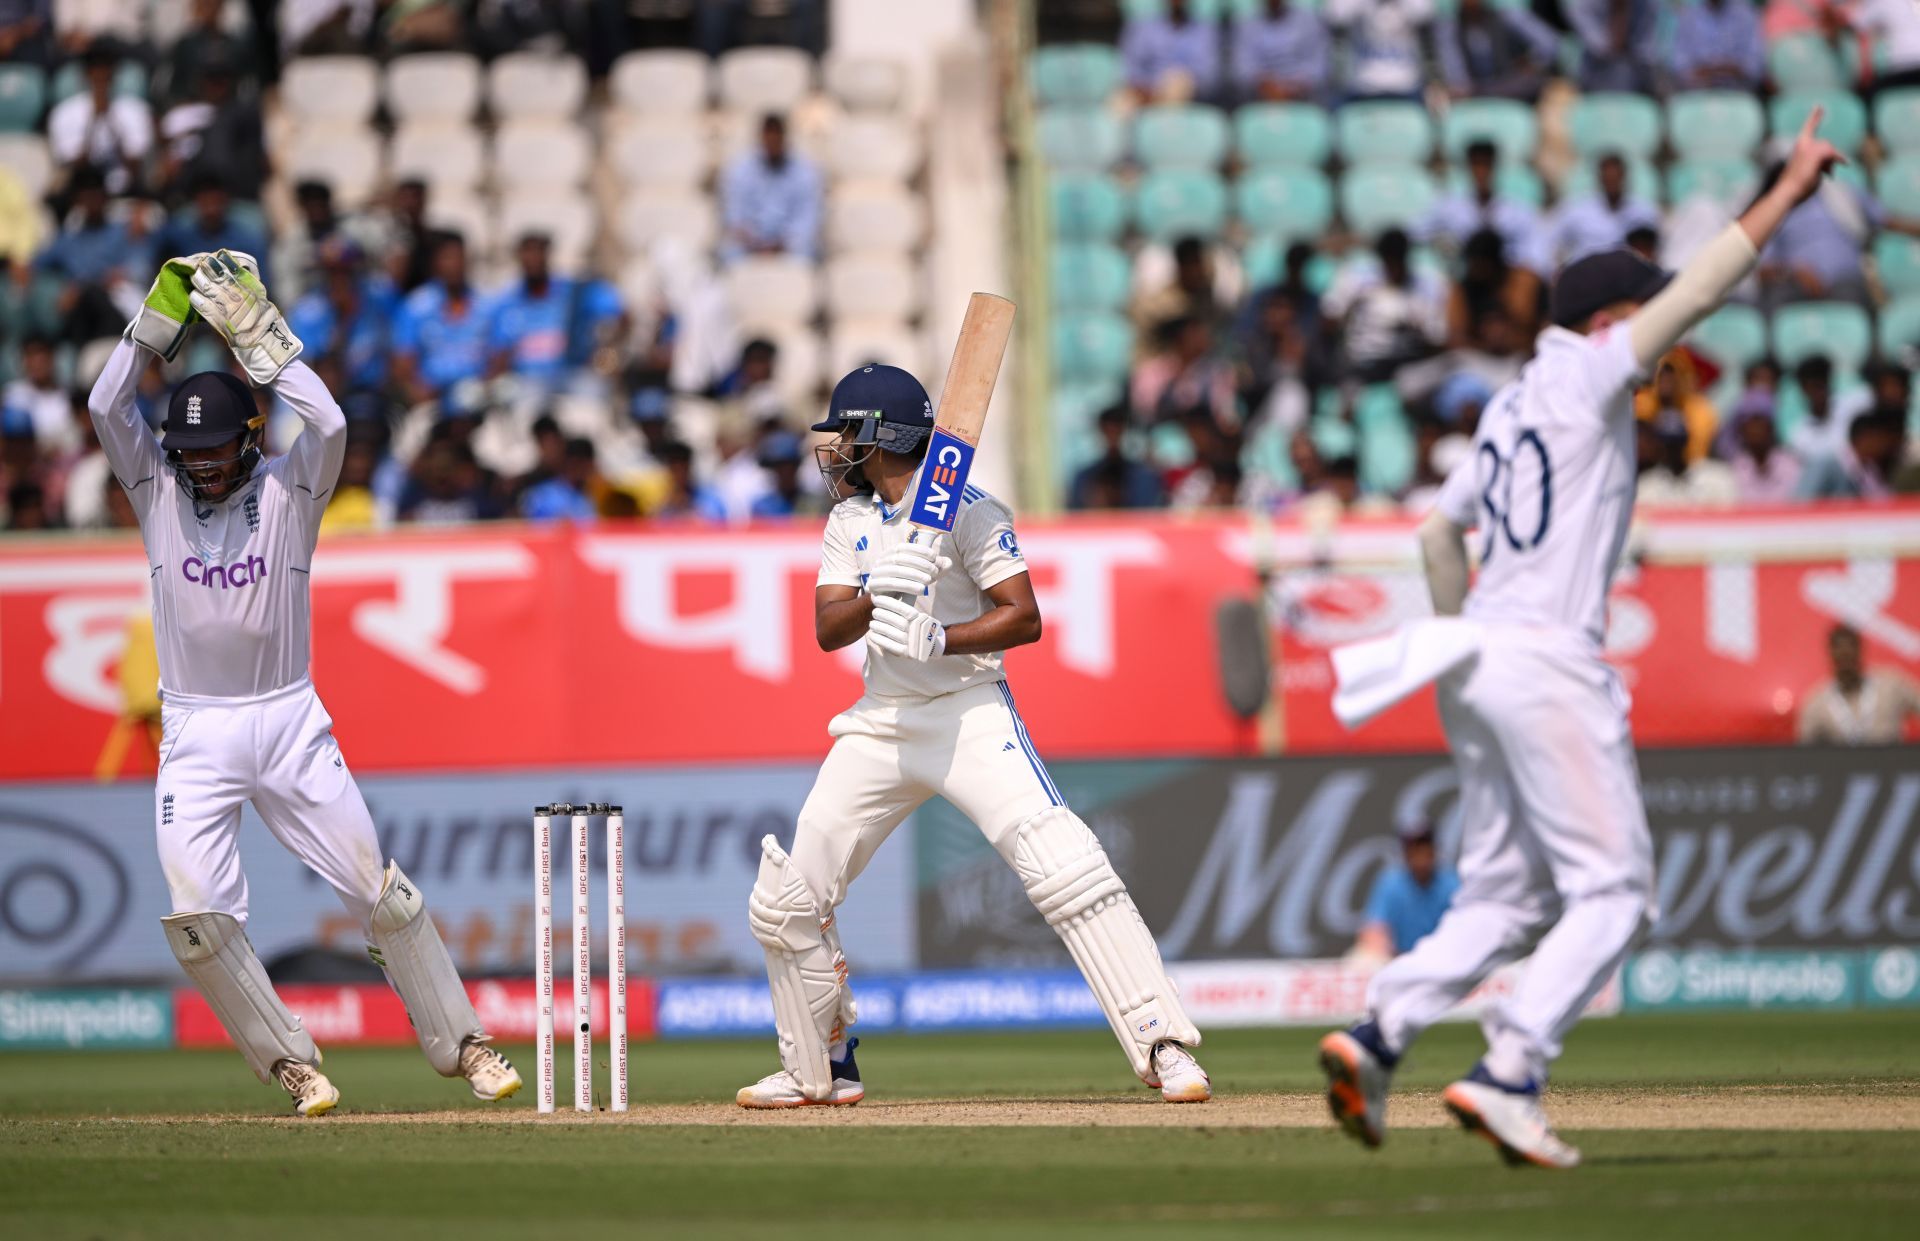 Shreyas Iyer was caught behind off Tom Hartley&#039;s bowling. [P/C: Getty]